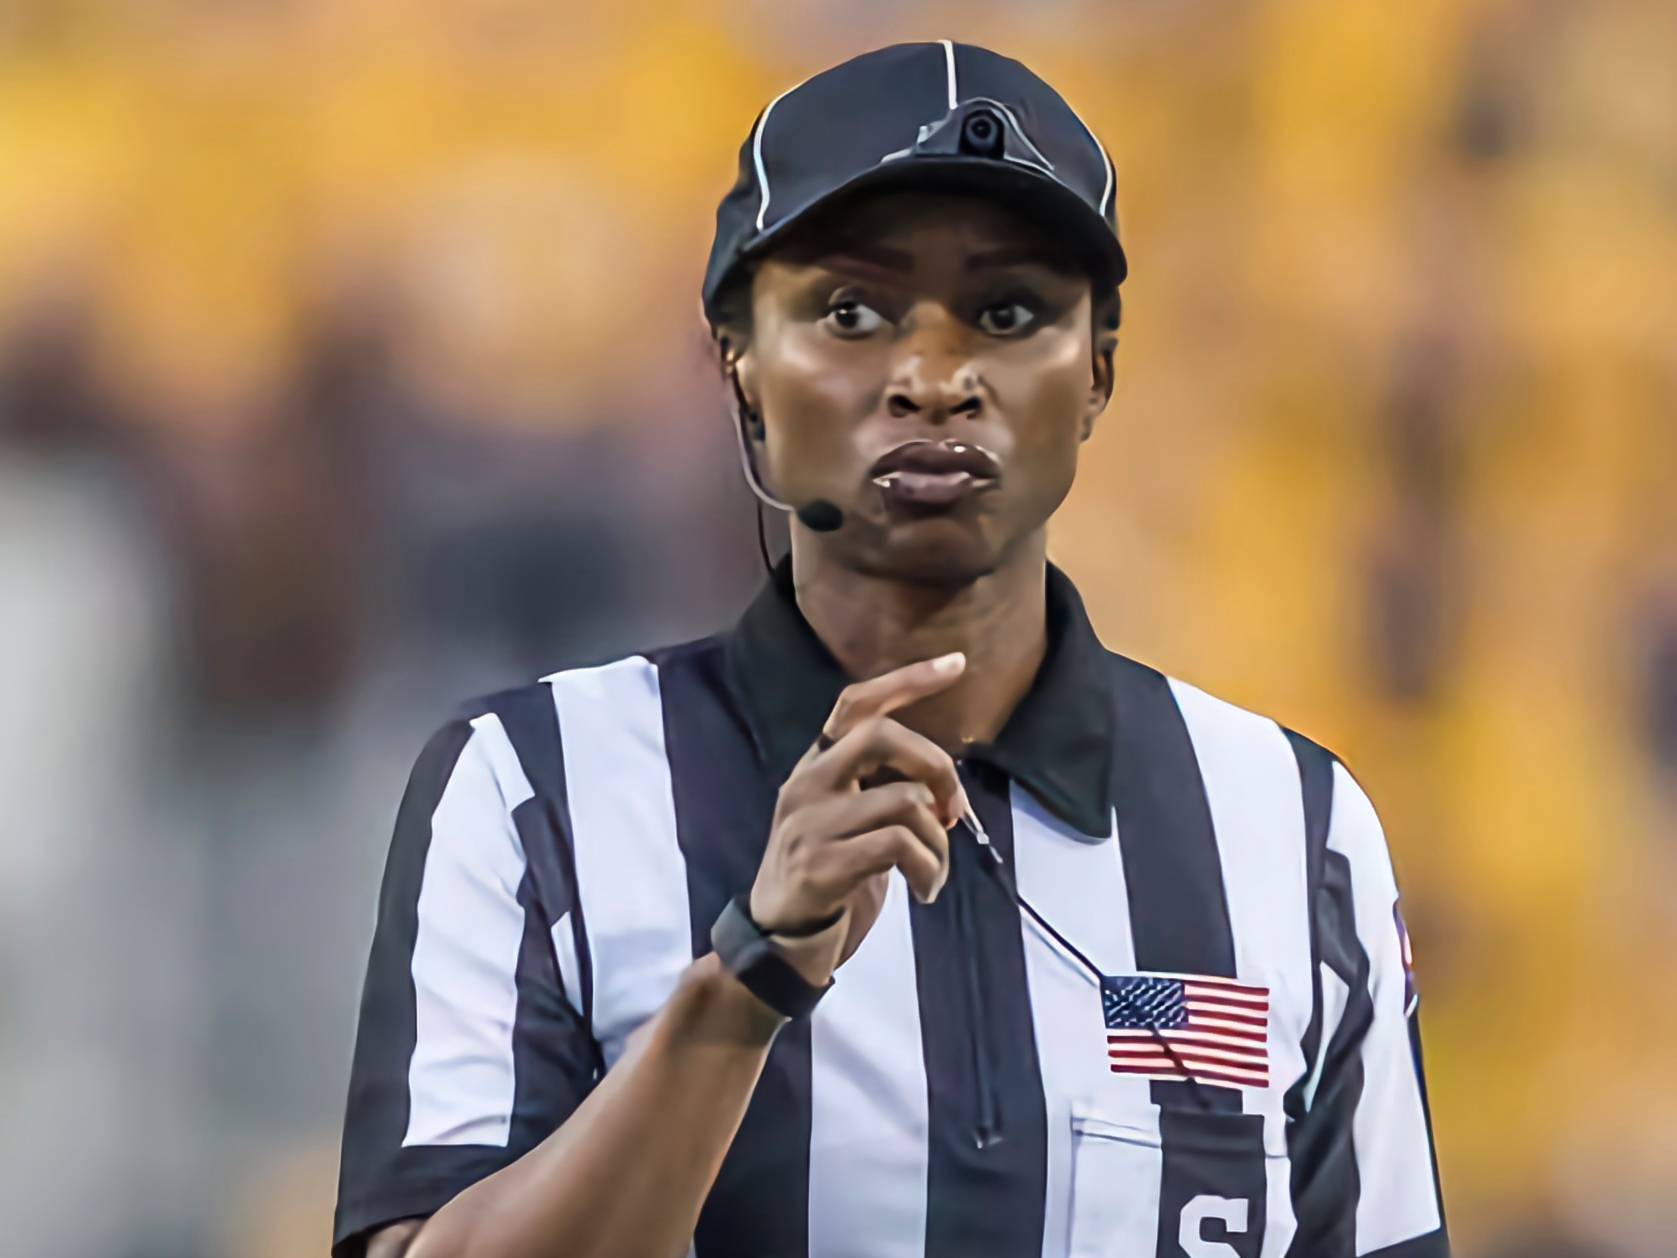 lashell nelson in referee outfit